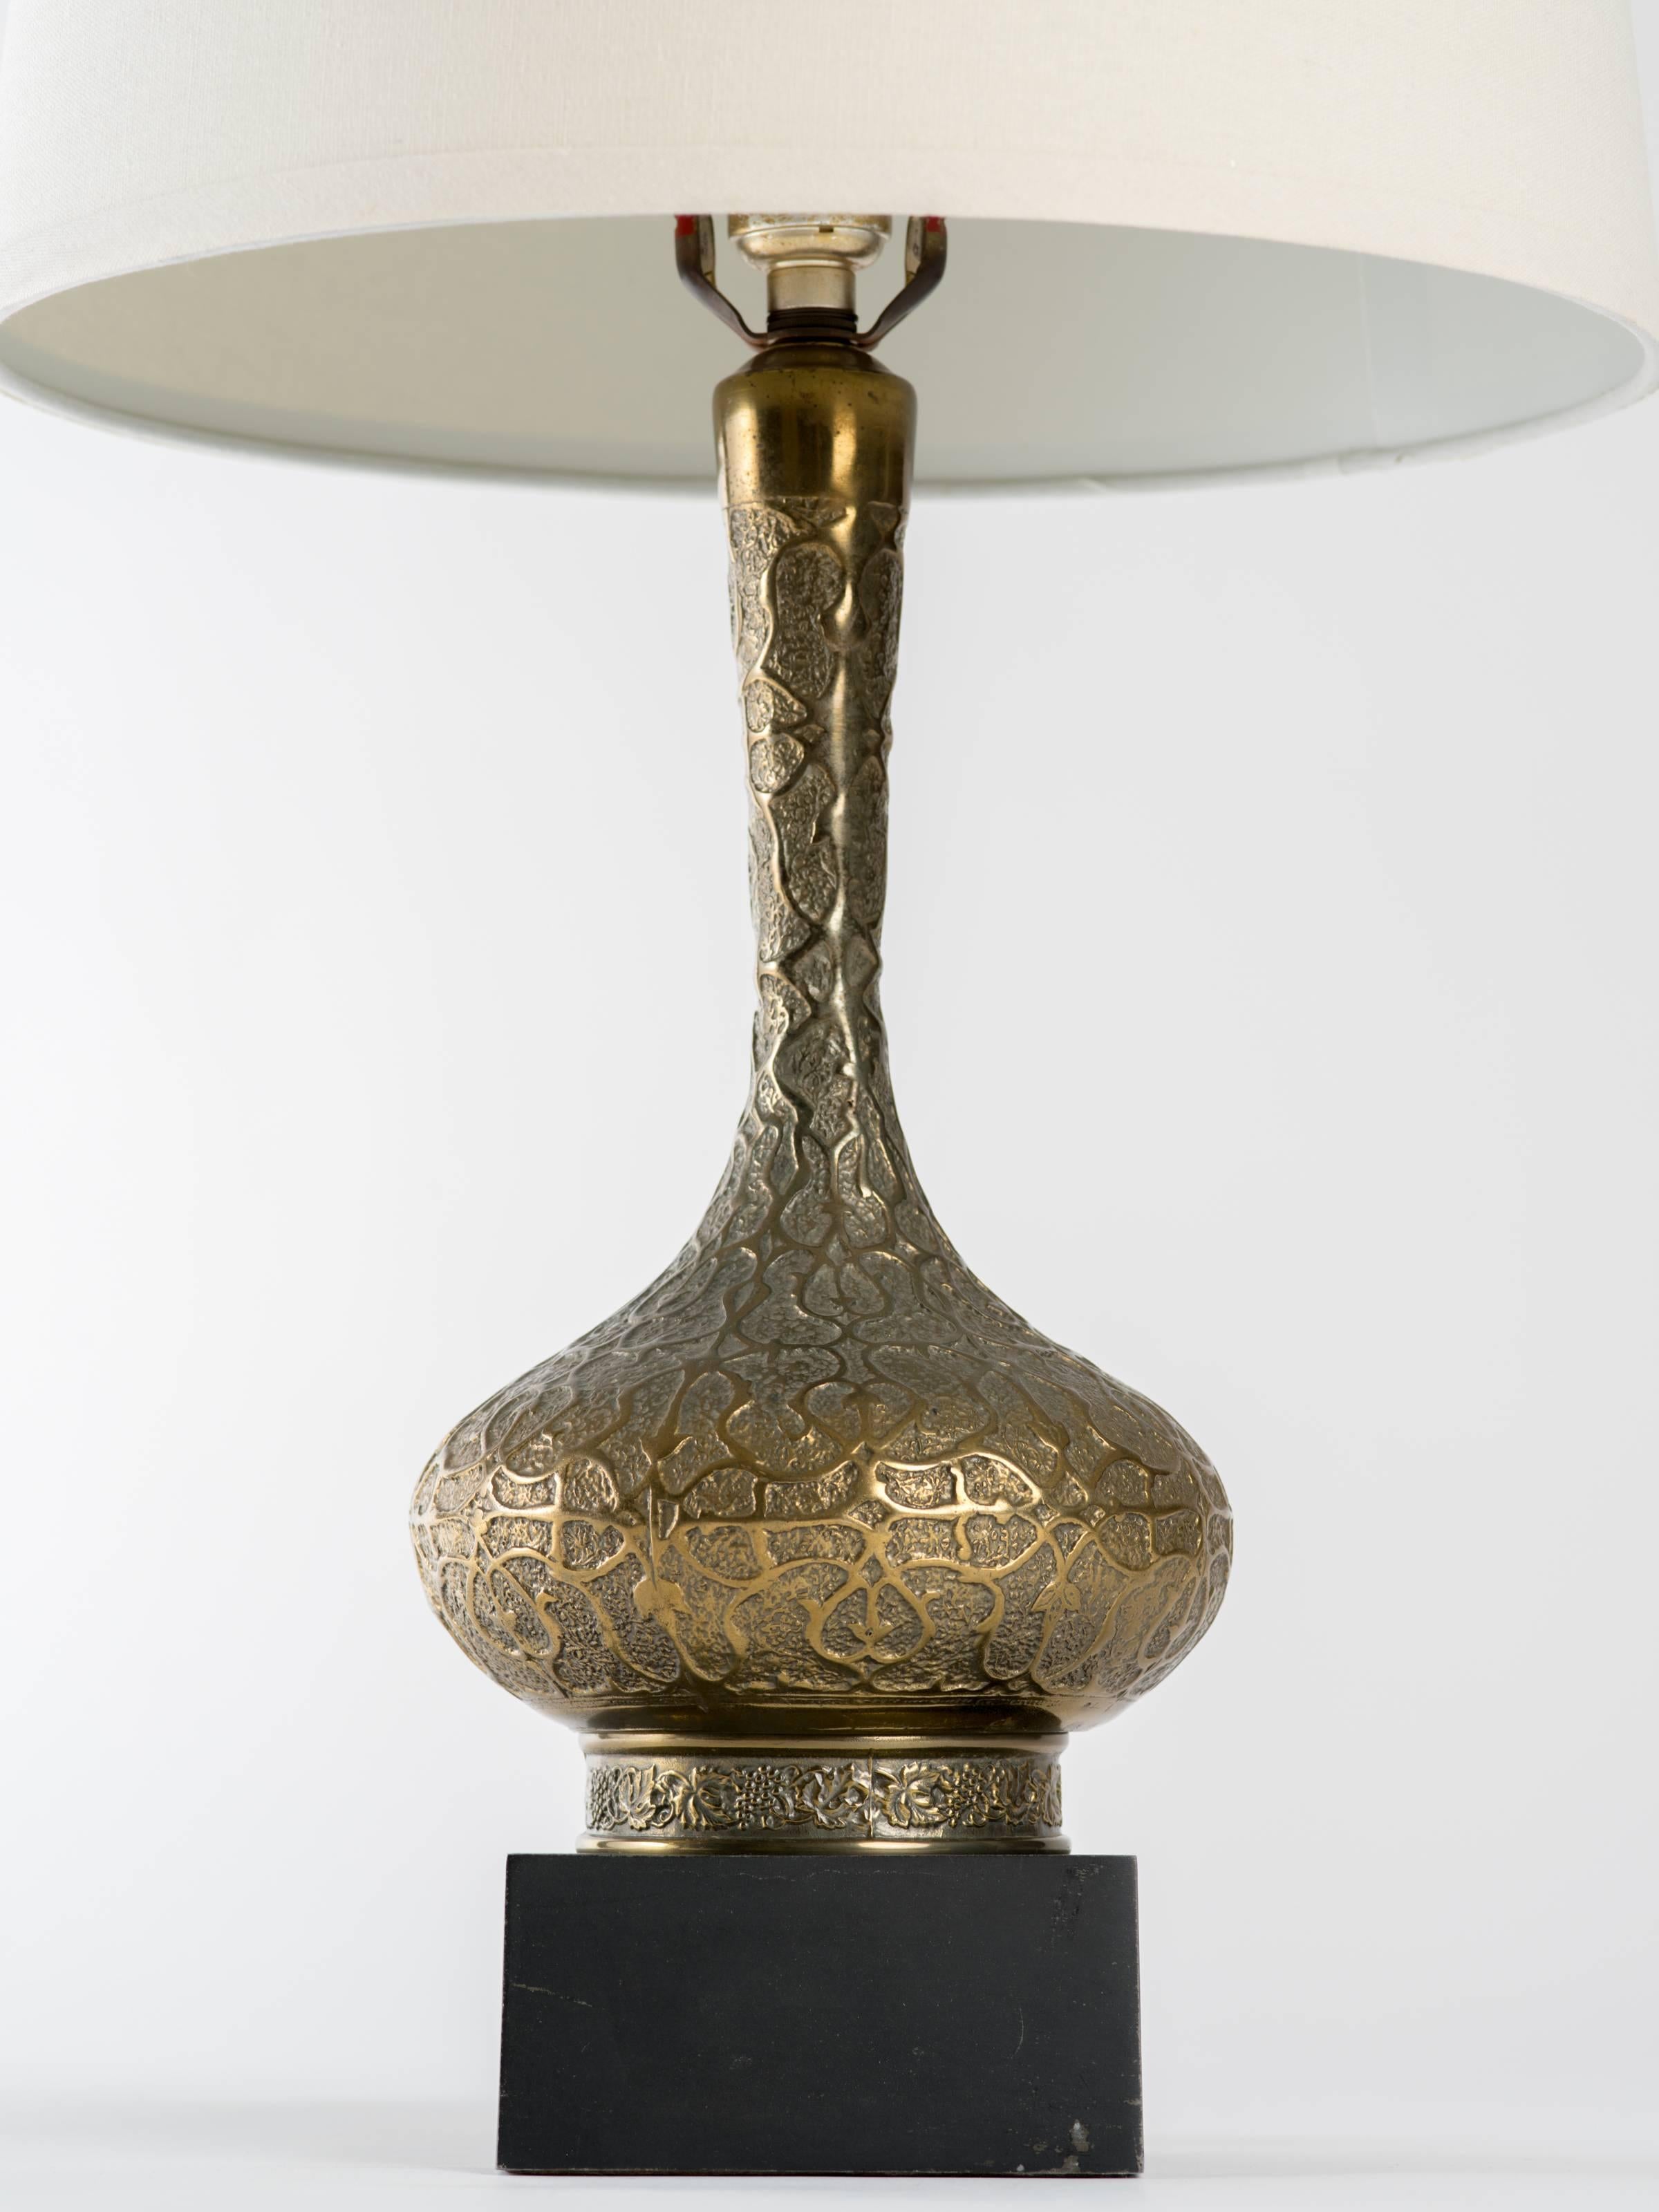 Elegant Moorish style brass lamp on black patinated metal base. Measures 26.5 inches overall height, lamp body 16 inches height. Base measures 5 inches square. Original brass papyrus form finial. Lampshade not included.